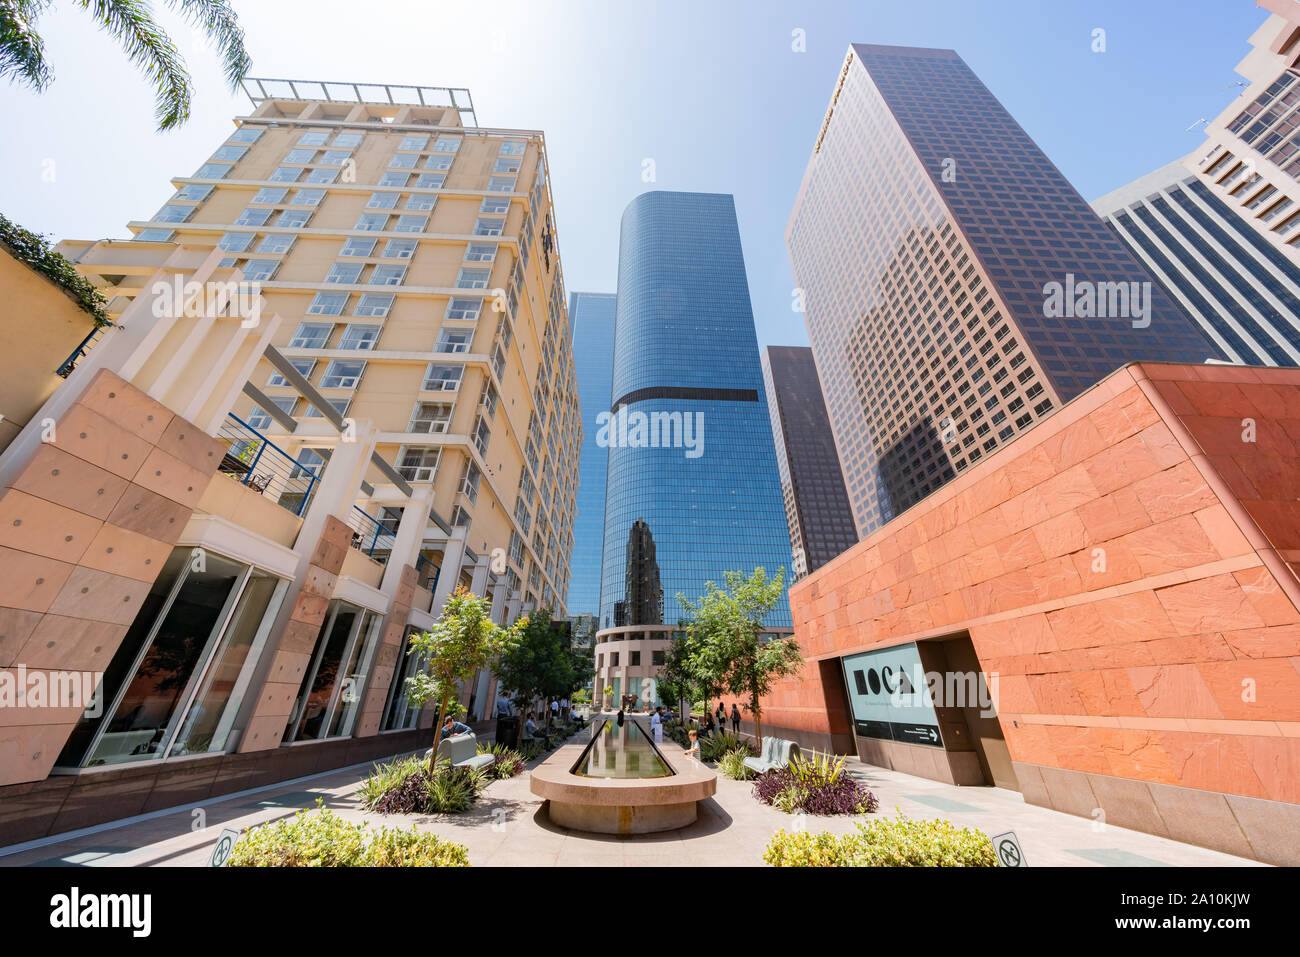 Los Angeles, AUG 10: Garden of The Museum of Contemporary Art on AUG 10, 2019 at Los Angeles, California Stock Photo